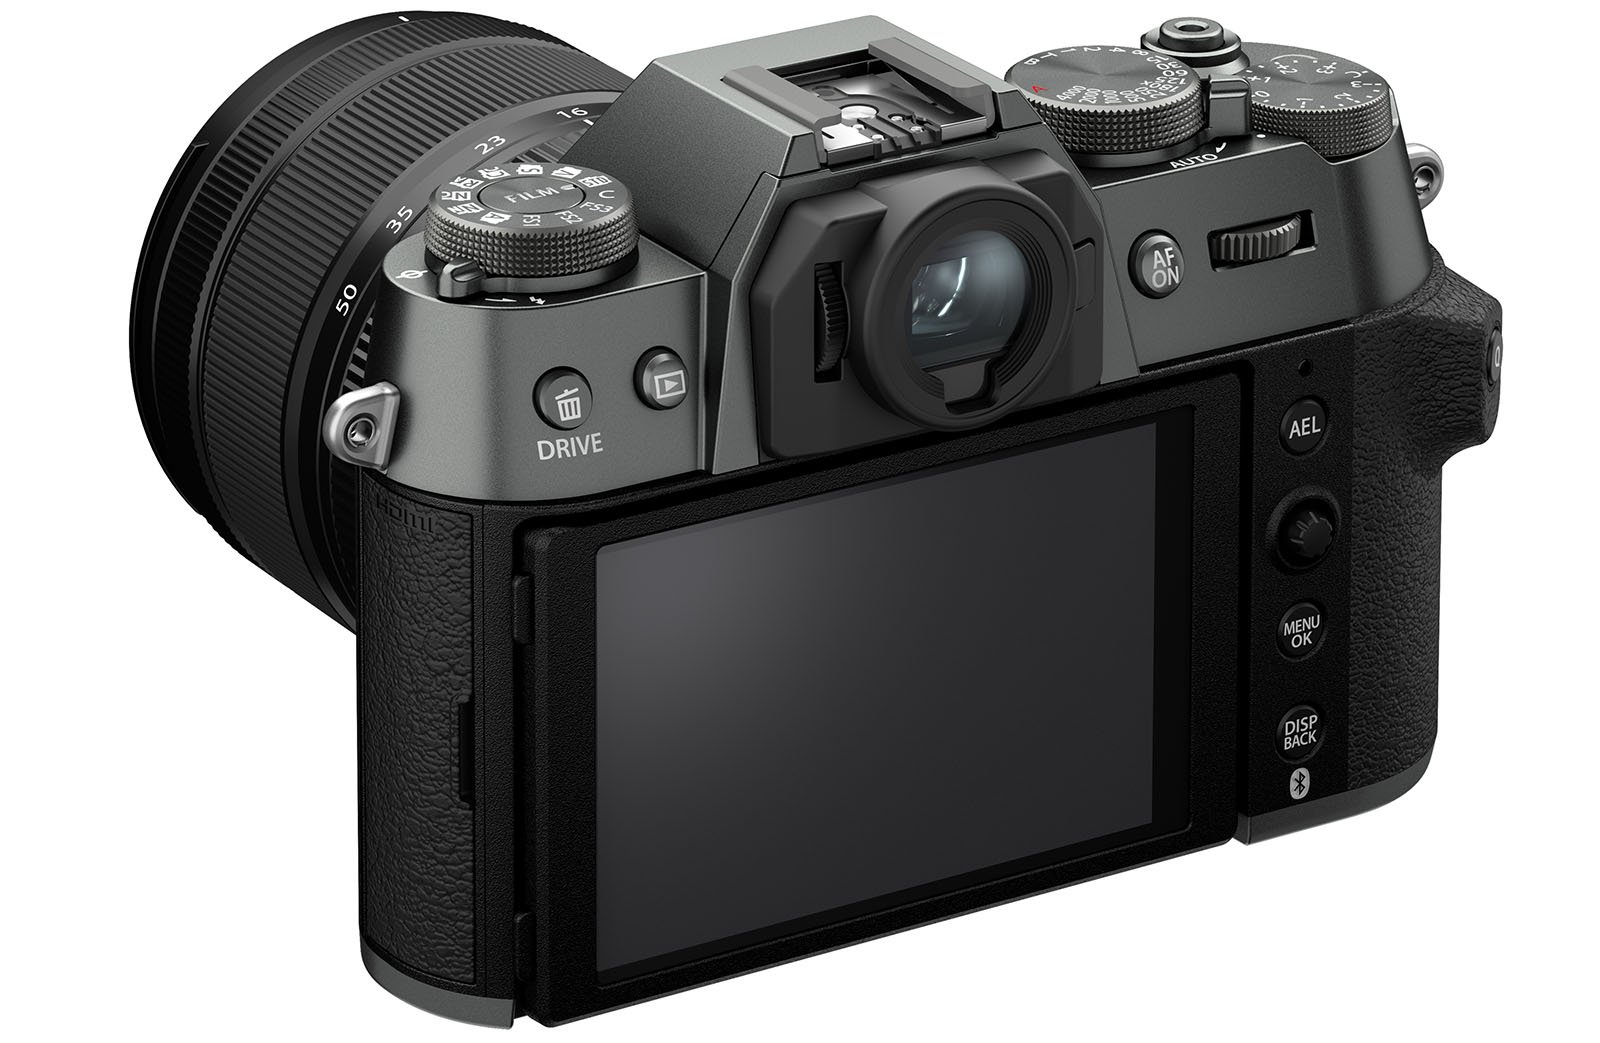 A digital mirrorless camera with a black and silver body is shown from the back, displaying its LCD screen and various control buttons and dials. The camera has a lens attached and is positioned at a slight angle to reveal both the back and side details.